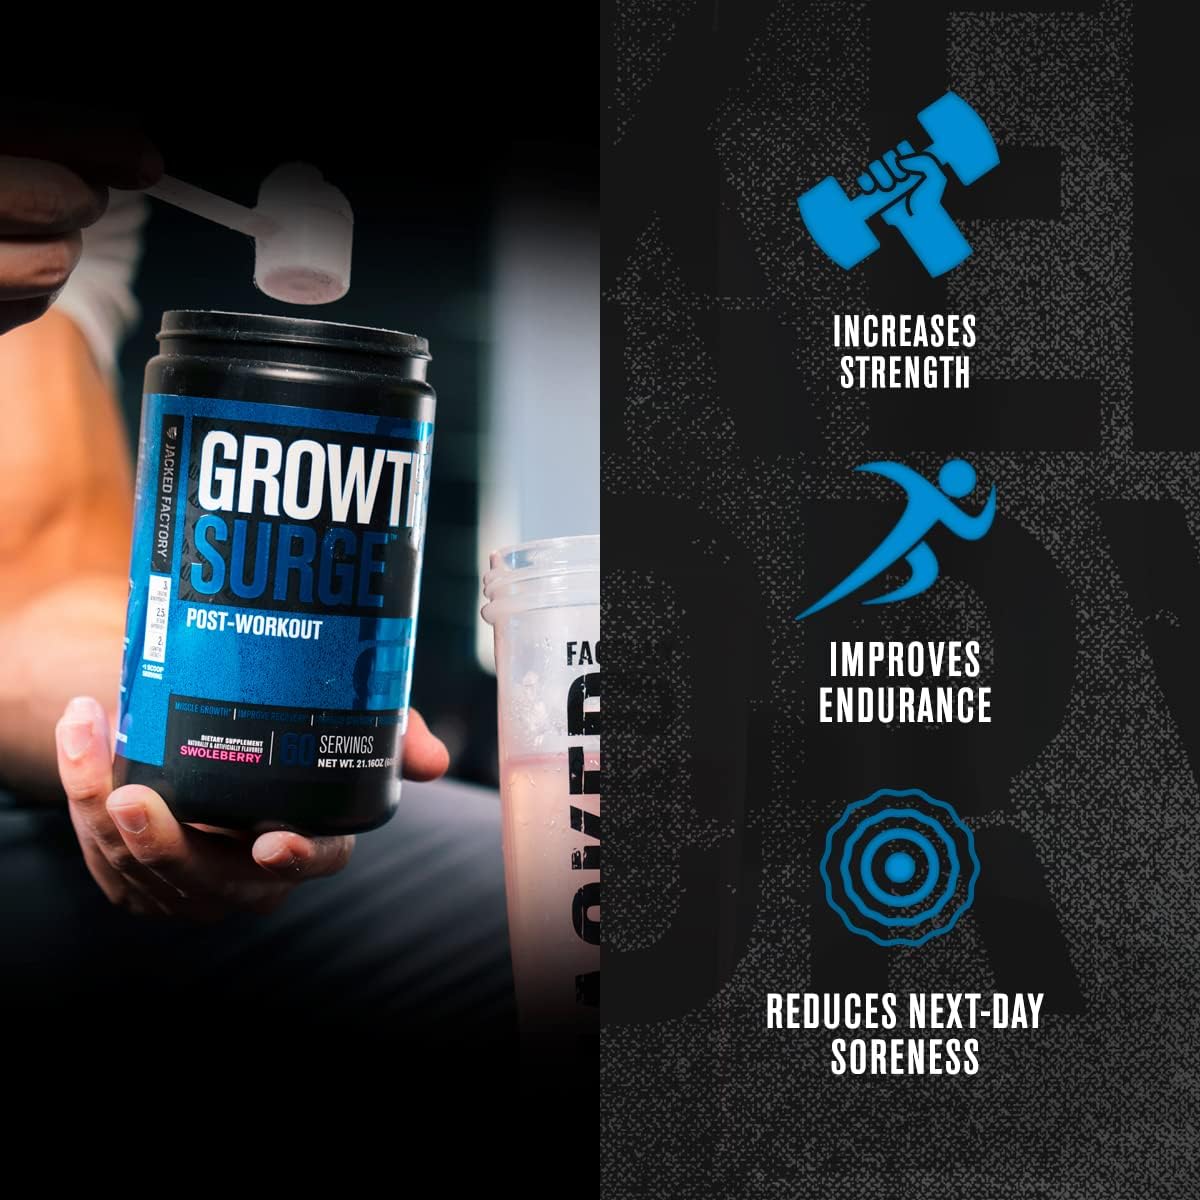 Jacked Factory Growth Surge Creatine Post Workout w/L-Carnitine - Dail